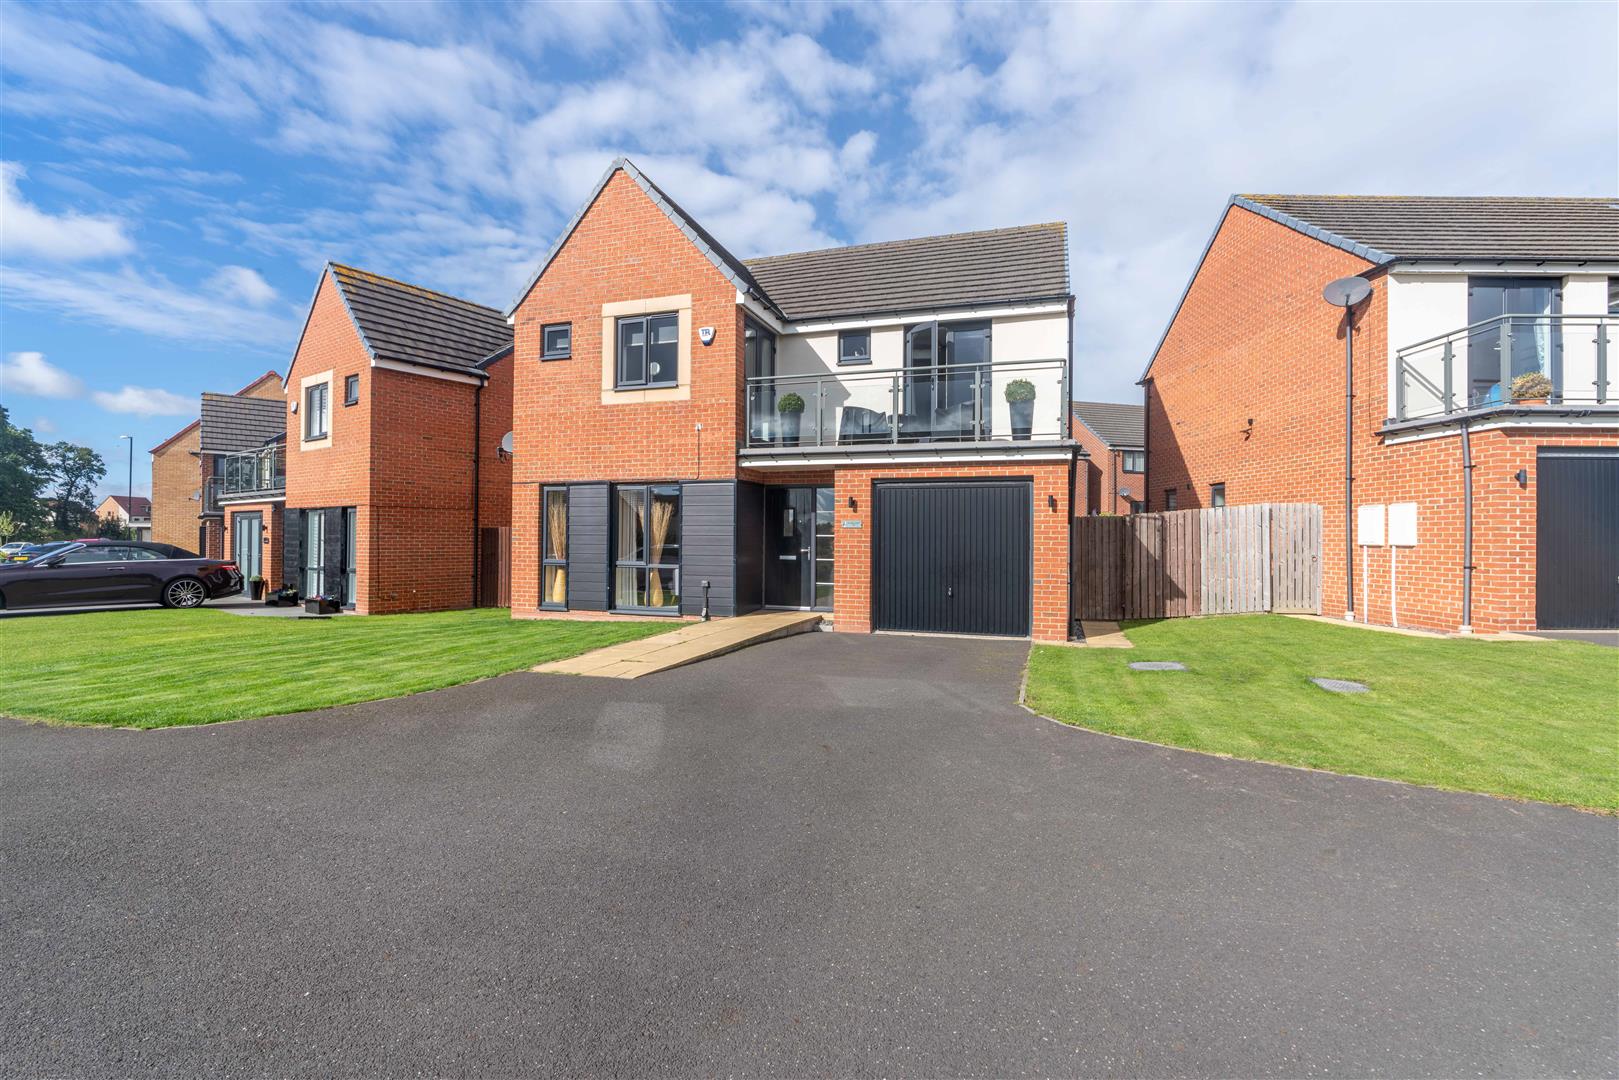 4 bed detached house for sale in Sir Bobby Robson Way, Great Park  - Property Image 1